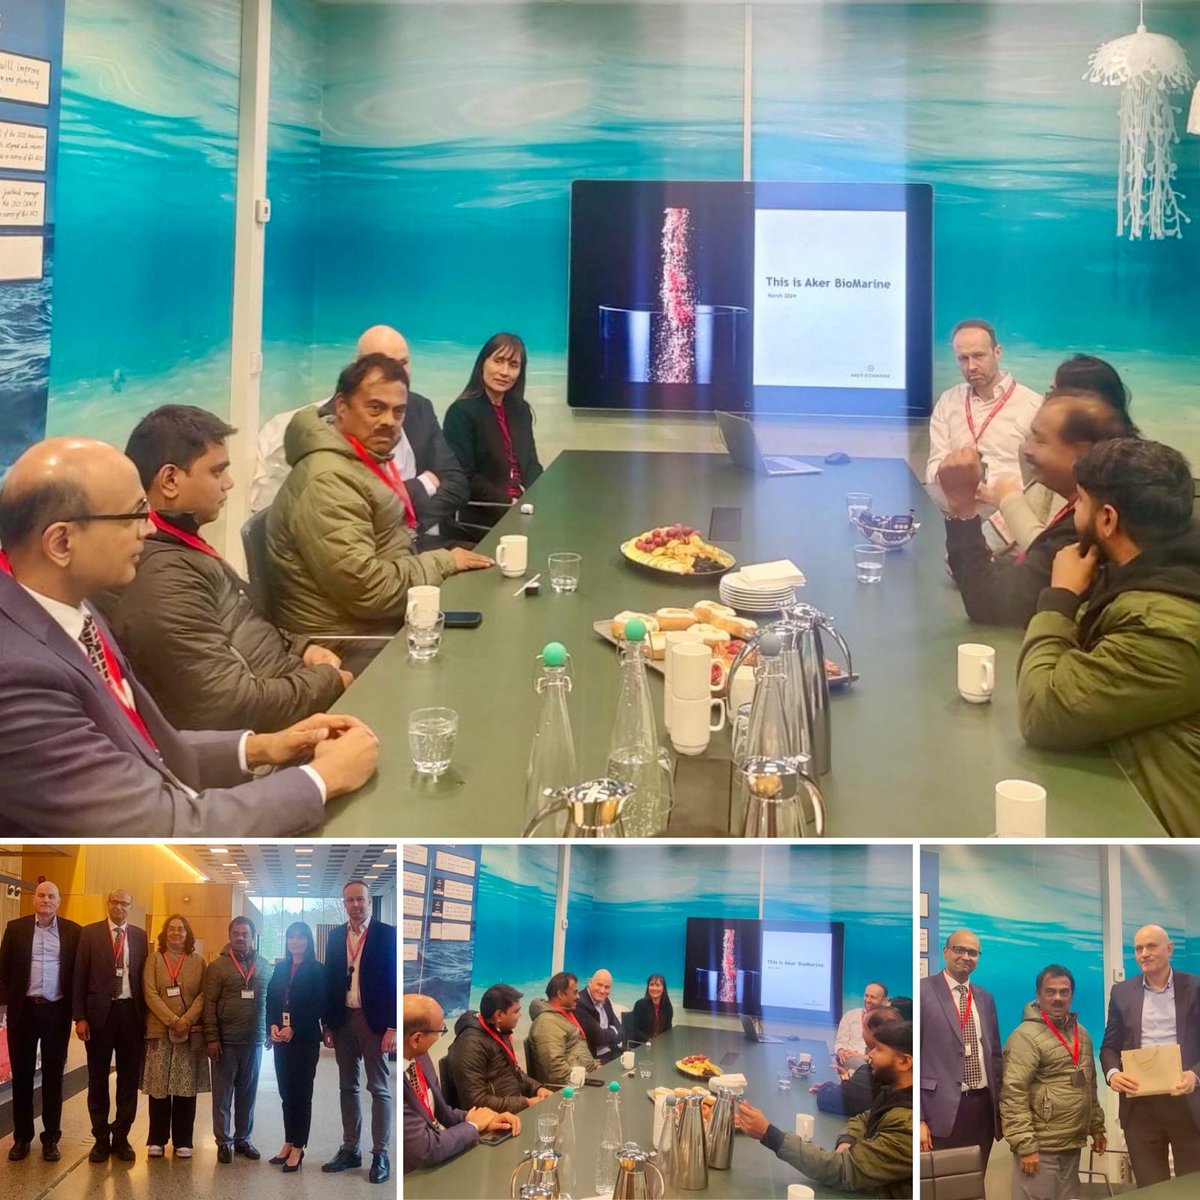 Shri Nilkant Ramnath Halarnkar, Hon’ble Minister of Fisheries, Government of Goa and his delegation visited the office of Aker Biomarine where presentation was made on krill harvesting in Antarctica and manufacture of fish feed by them.